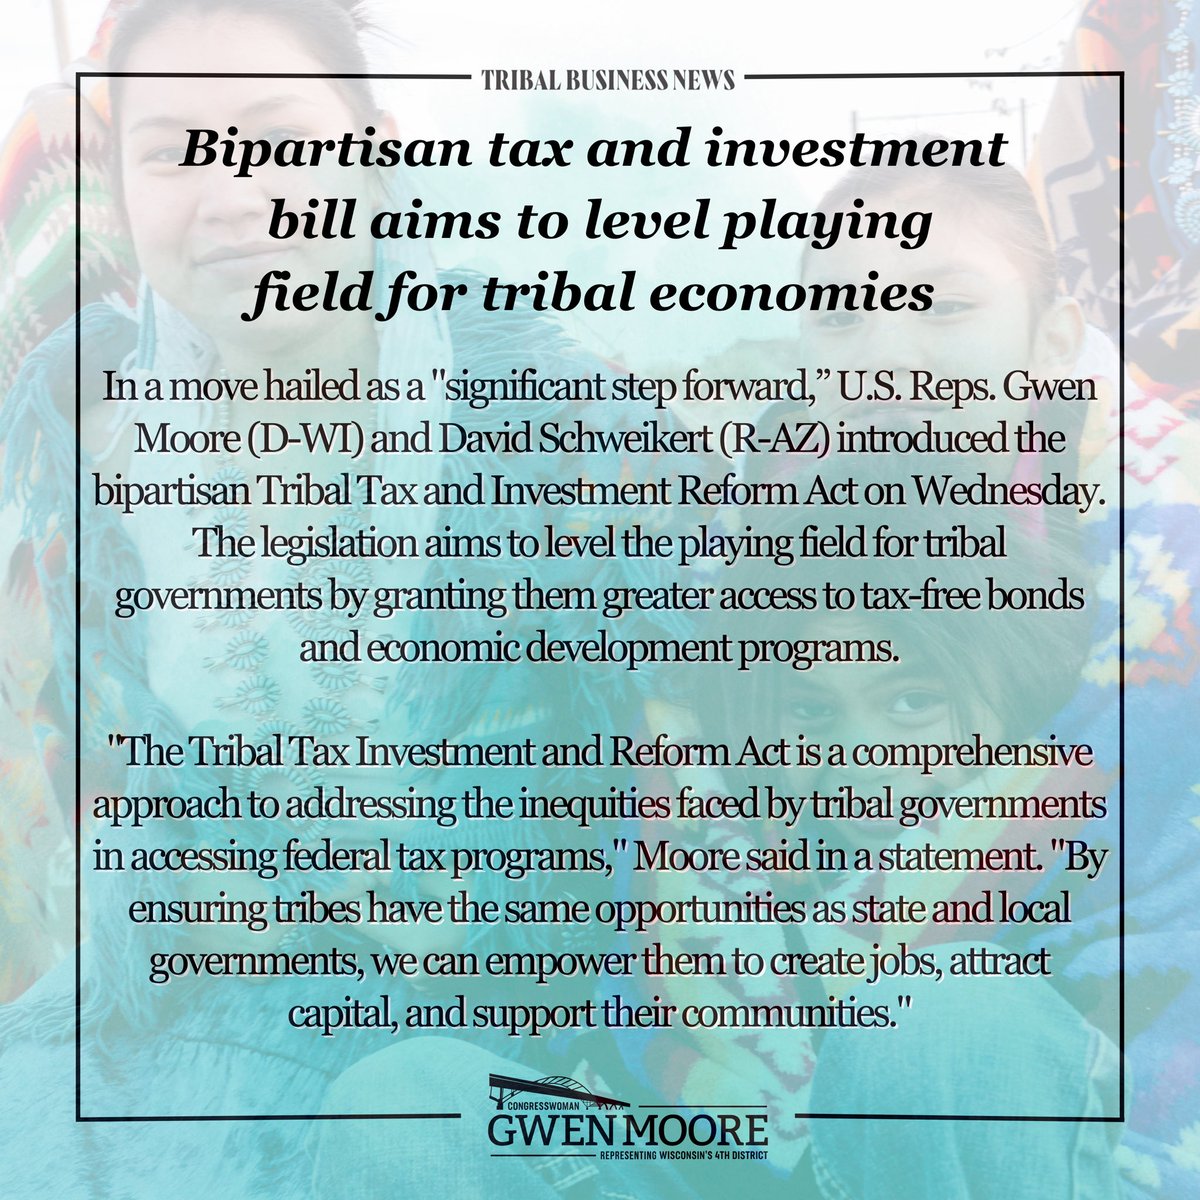 It isn't fair for tribal nations to face undue burdens when it comes to accessing incentives in our tax code compared to state & local governments.   My bipartisan legislation w/ @RepDavid would remove barriers that have prevented their ability to create economic opportunity.